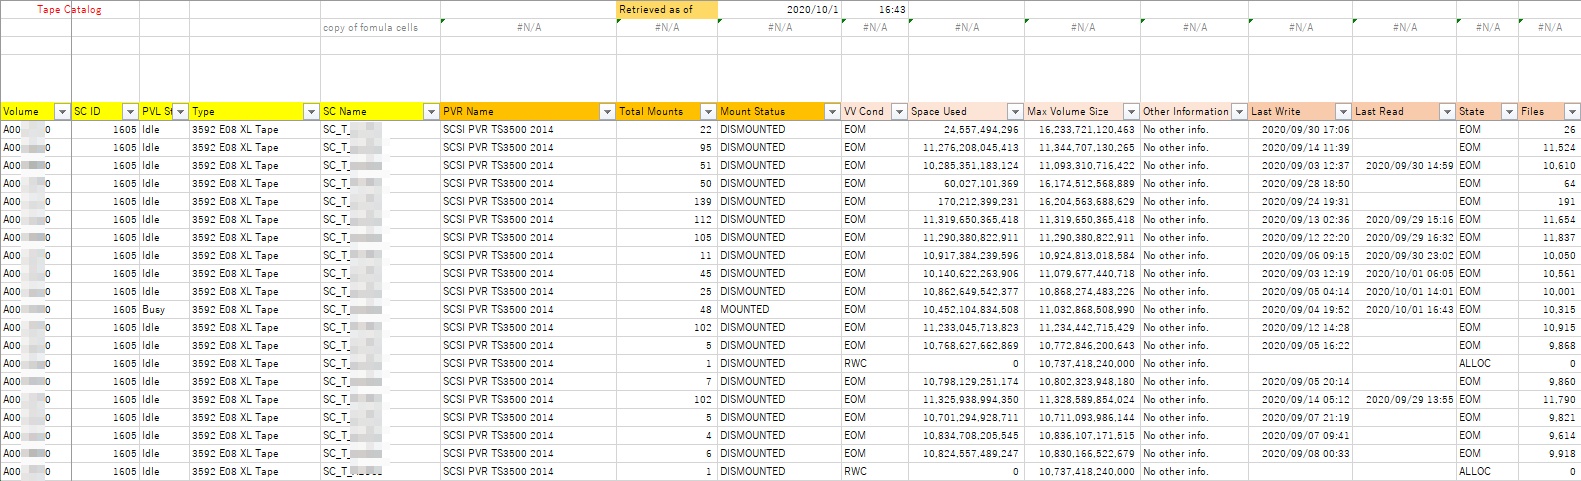 Screen capture of the Tape Catalog Excel sheet